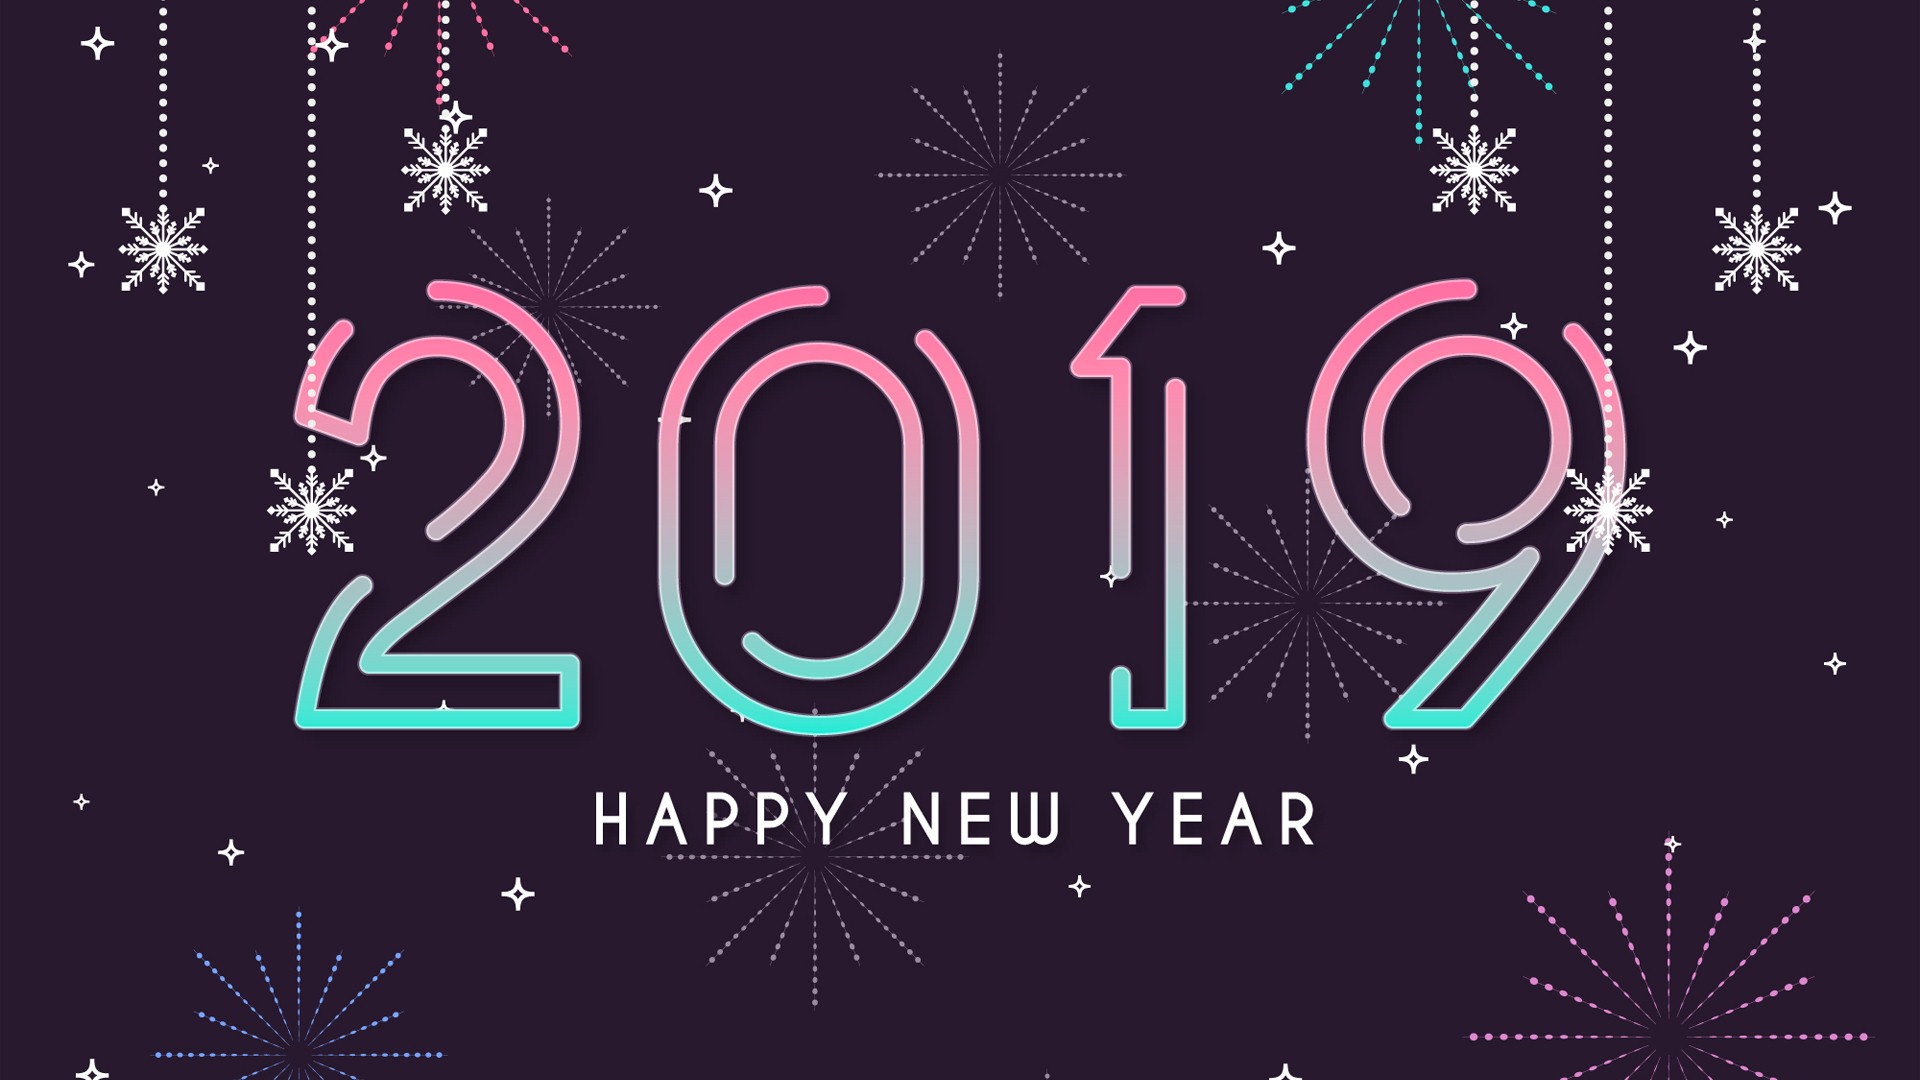  Happy  New  Year  2019  Images Download  AtulHost